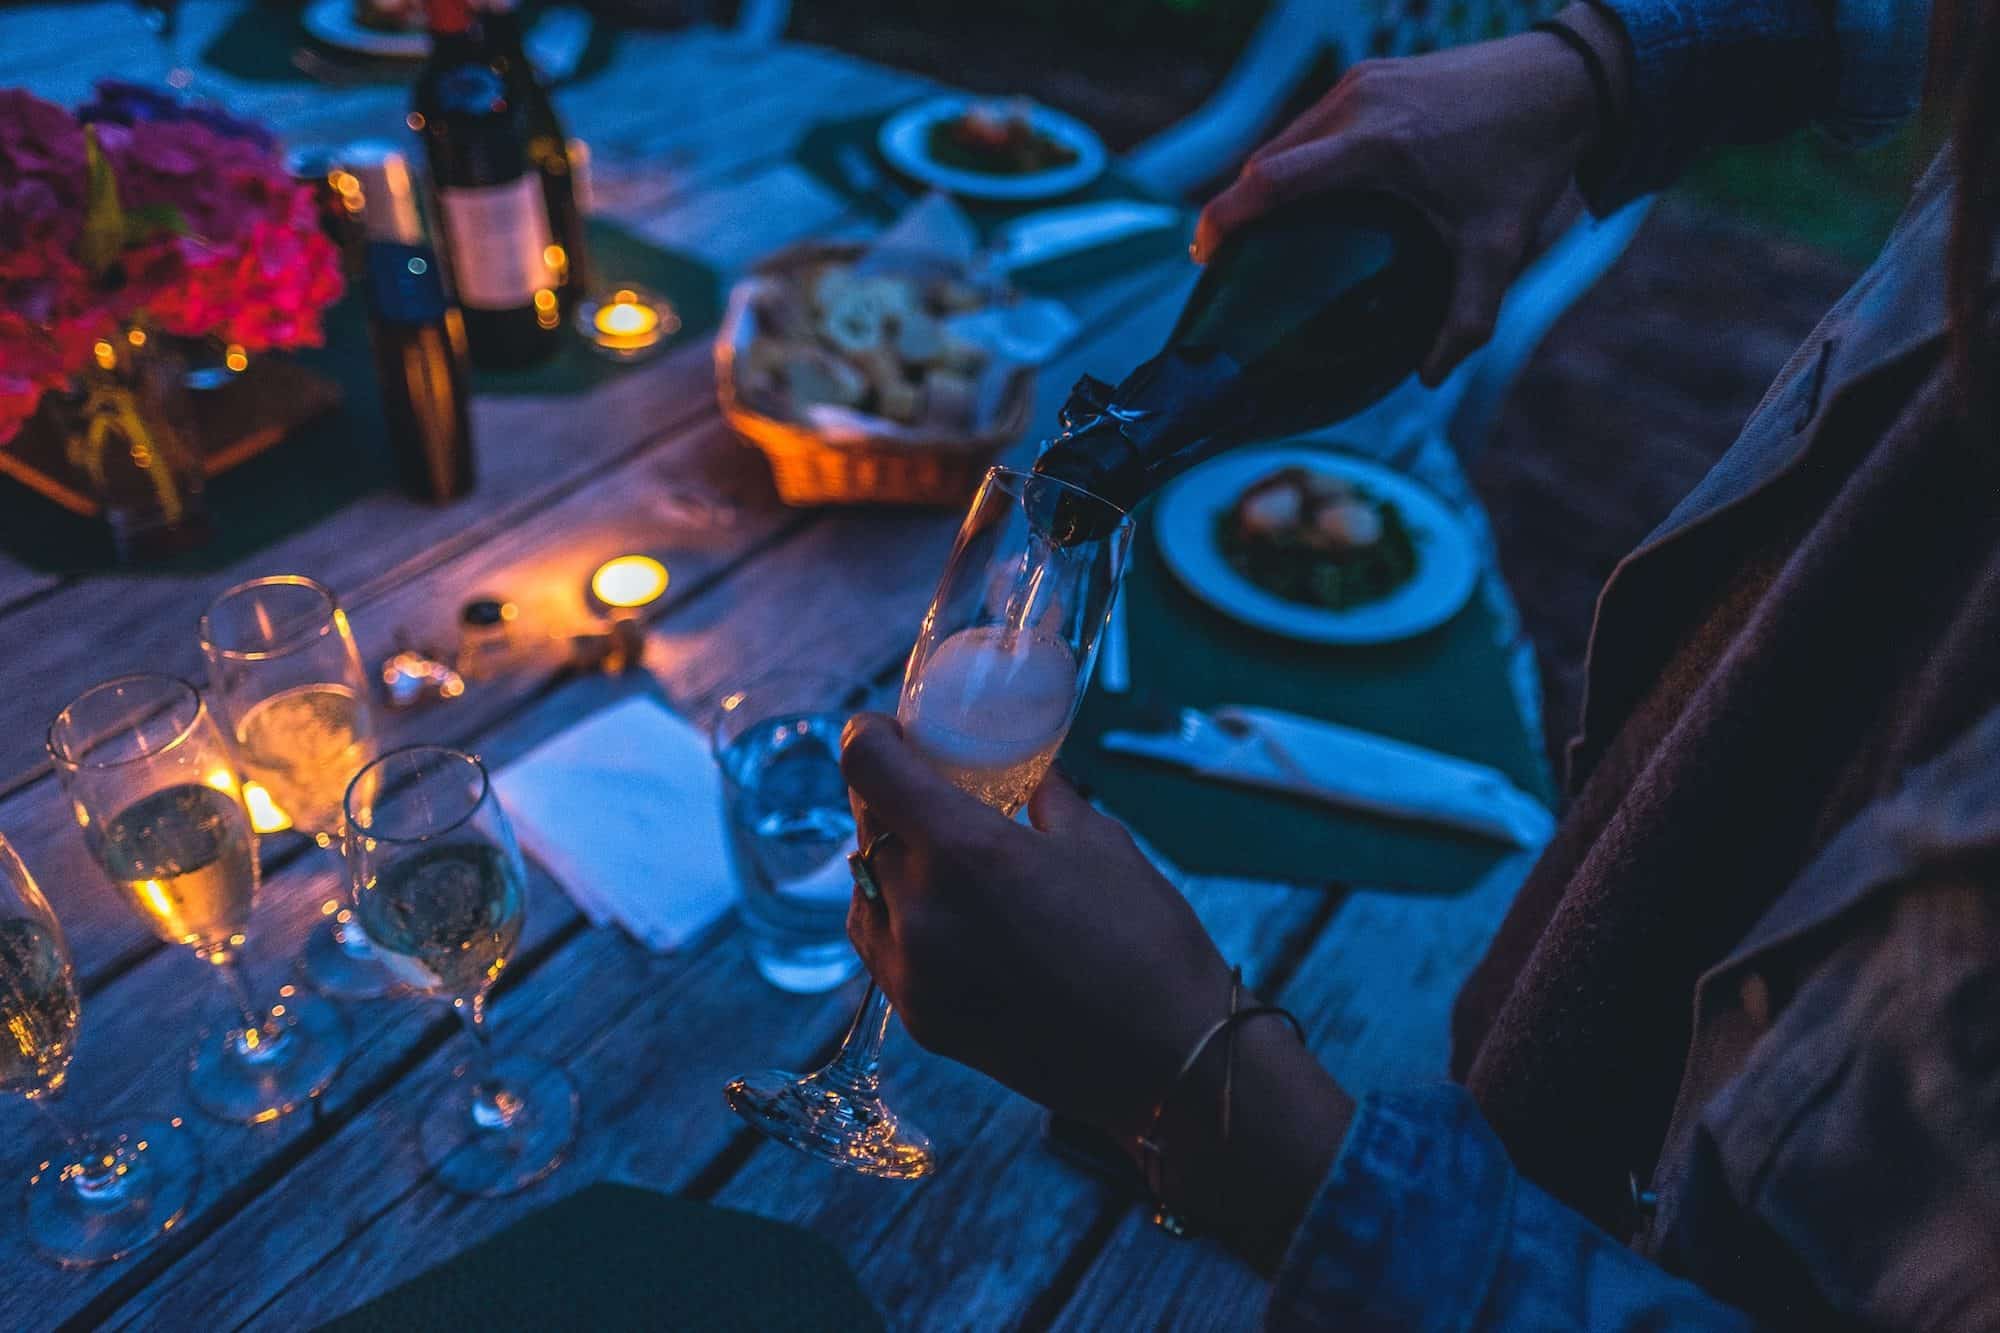 A woman pouring a glass of champagne at an outdoor candle-lit dinner on New Year's Eve.